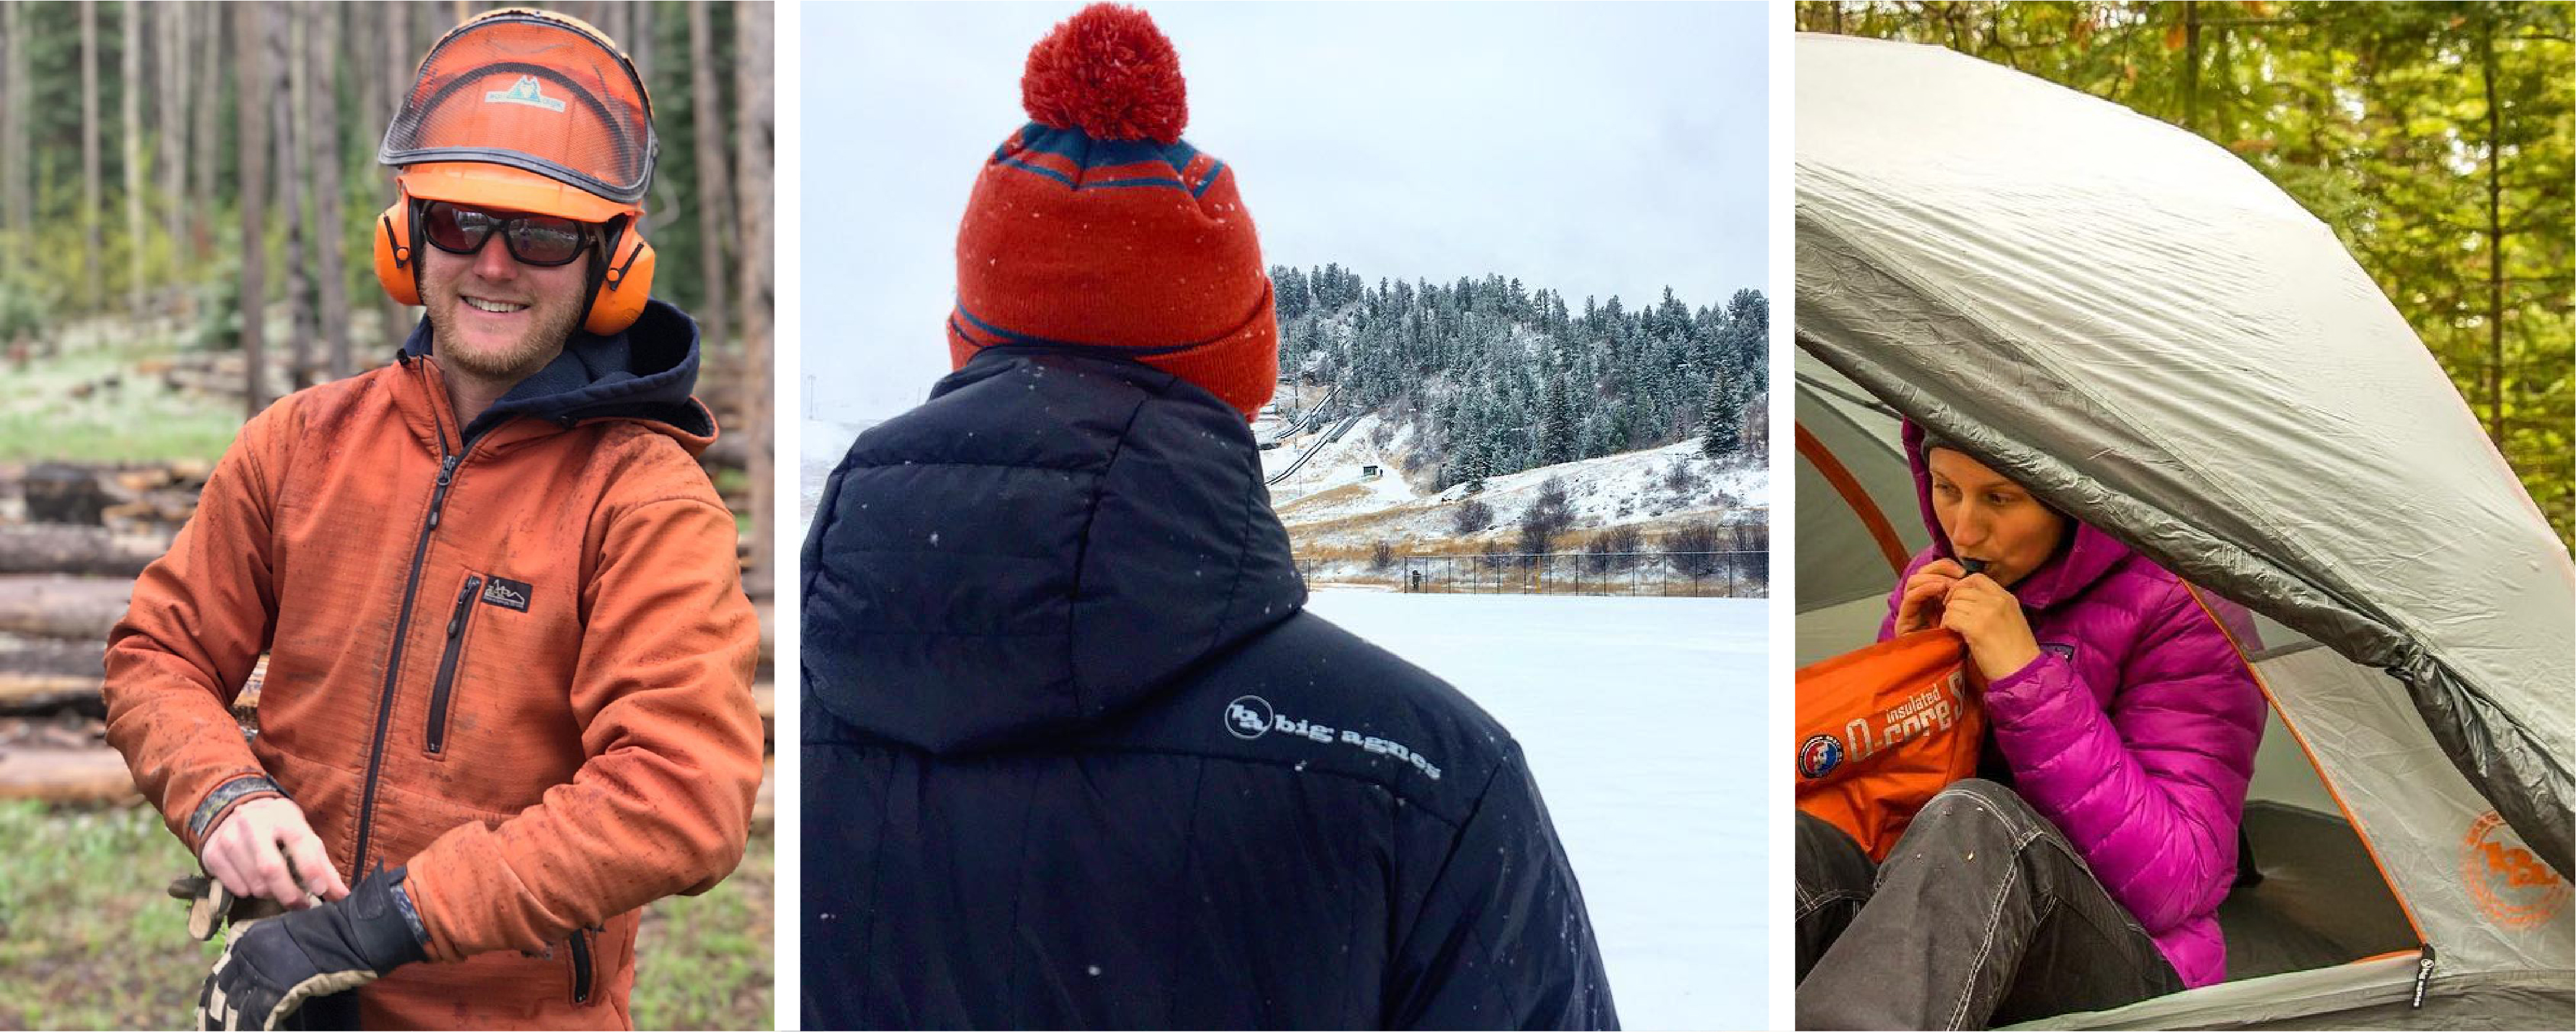 Stay dry and warm in coats from Steamboat Springs brands: Big Agnes and BAP